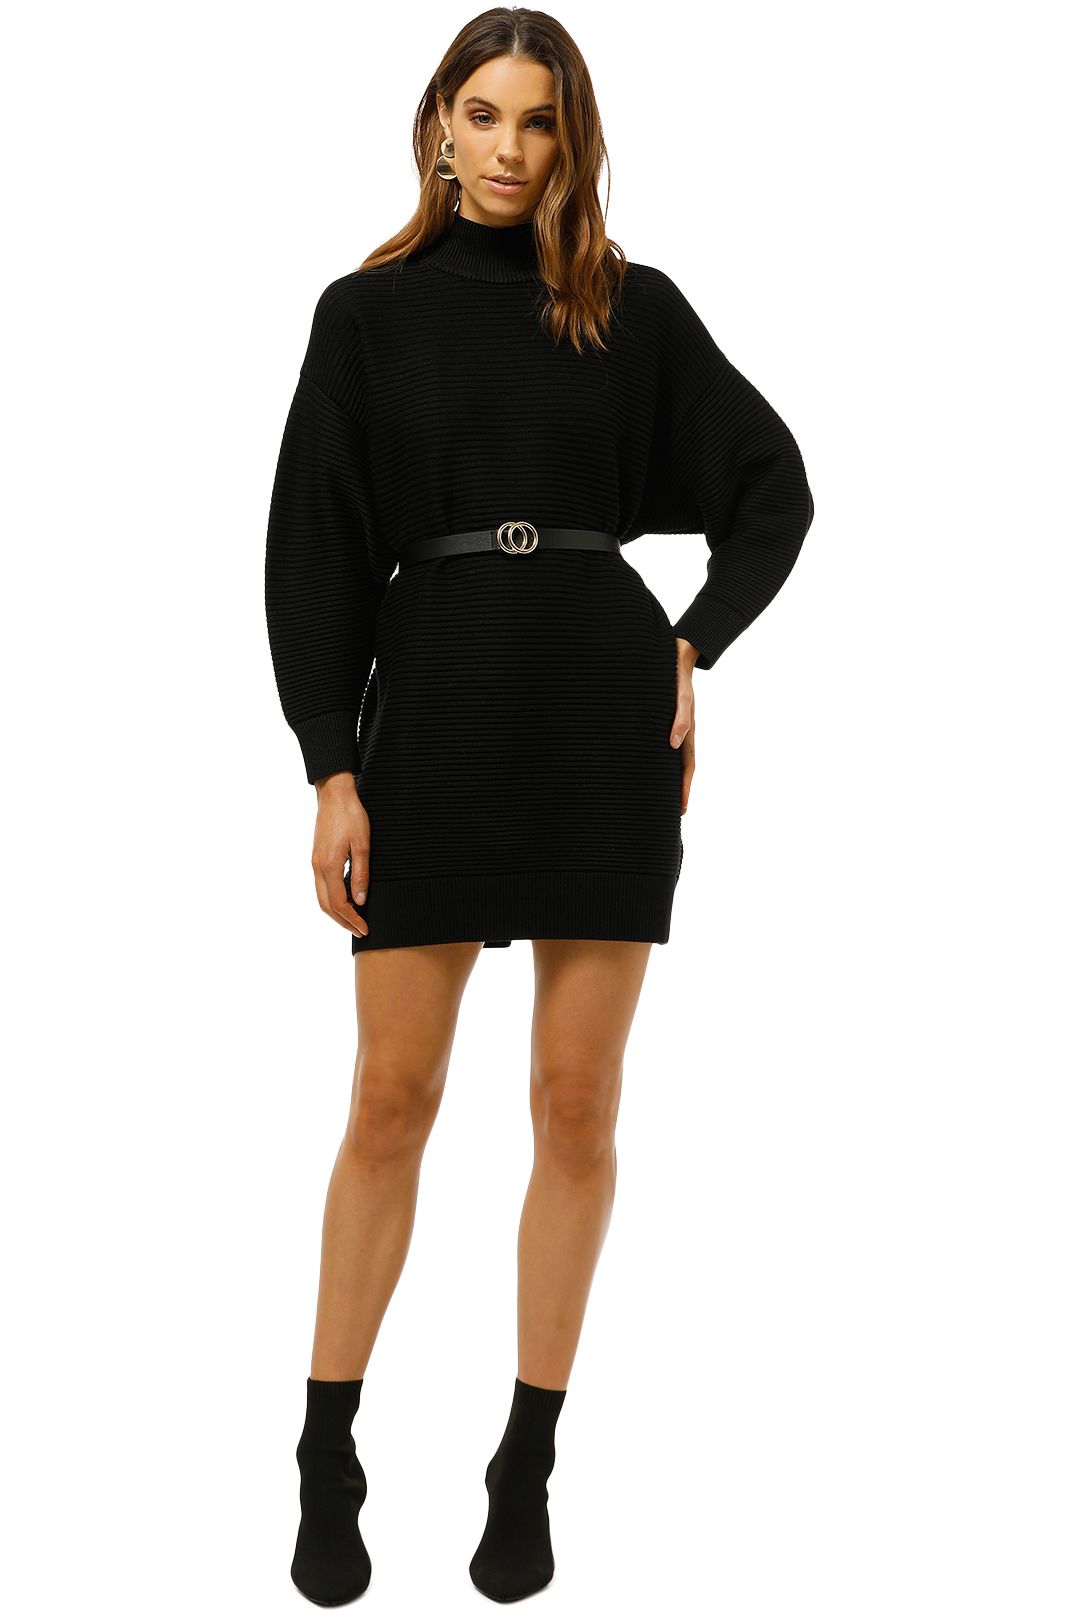 MNG-Long-Knit-Sweater-Black-Front